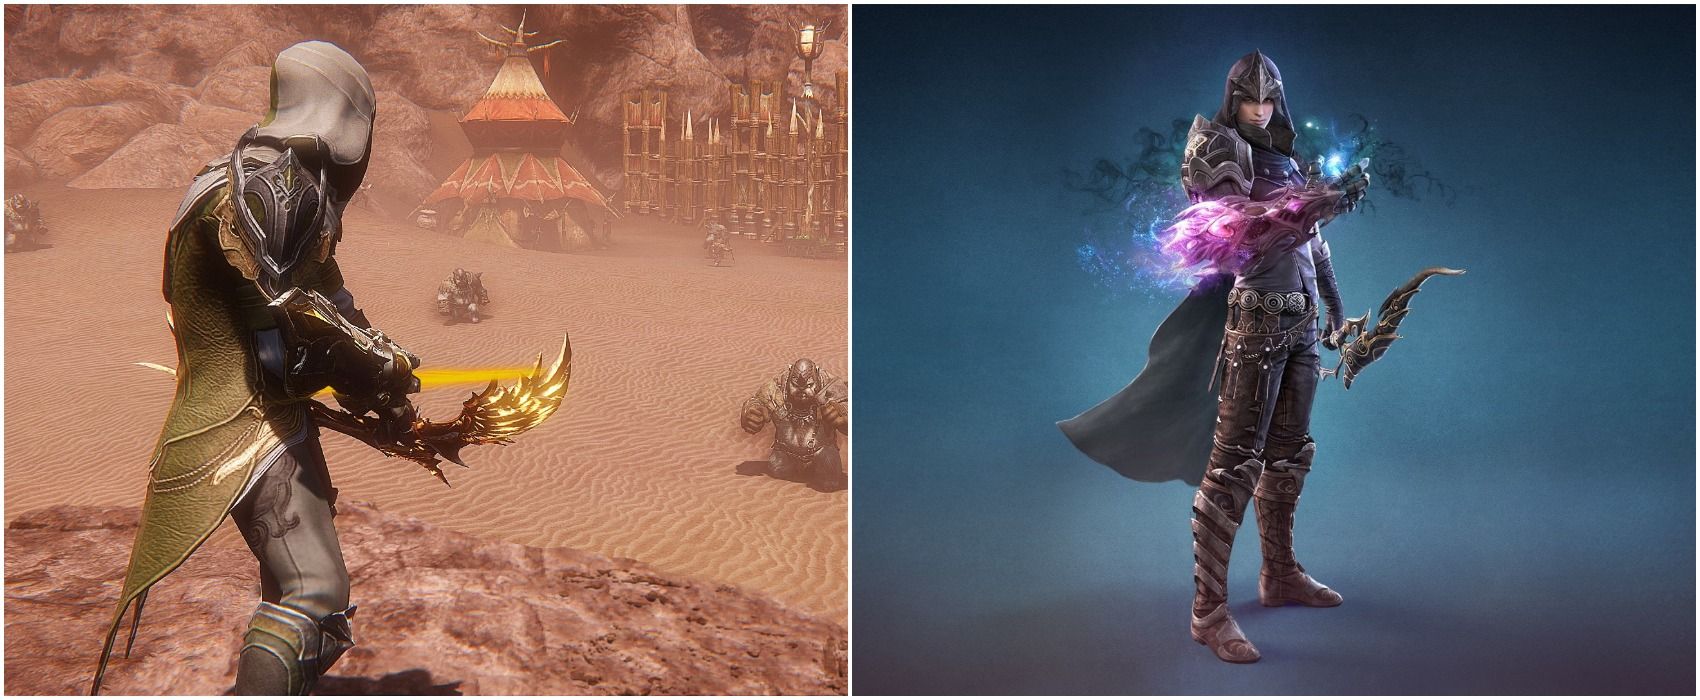 Riders Of Icarus Side By Side Male Ranger Standing In Desert Holding Bow And Male Ranger Channeling Purple Chaos Magic With Bow in Other Hand